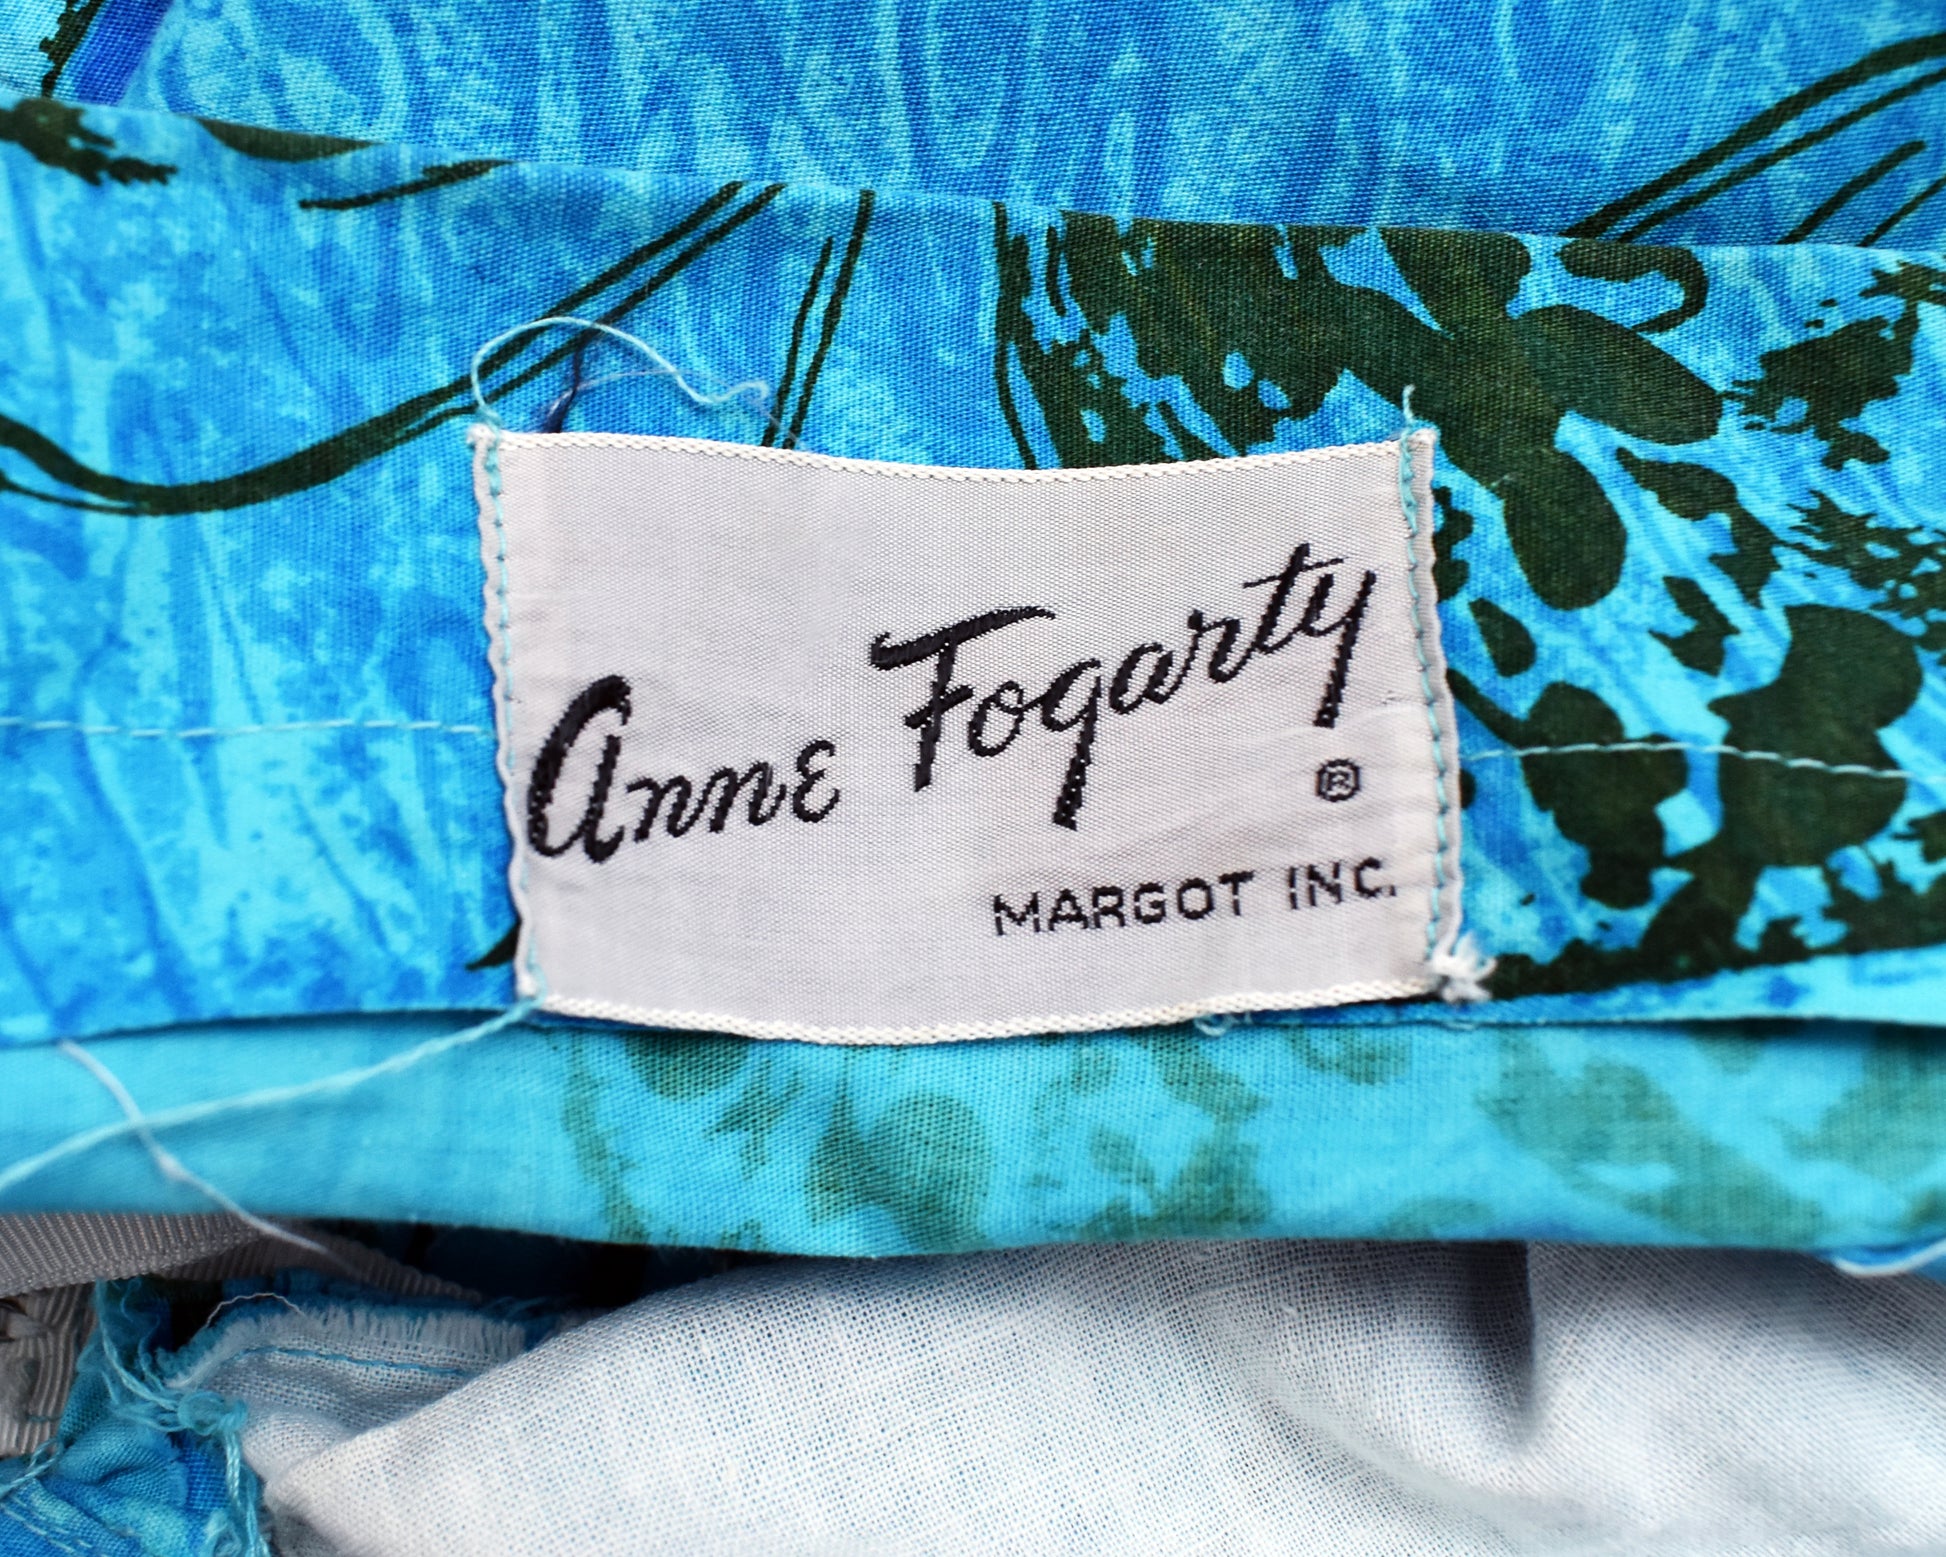 Close up of the tag which says Anne Fogarty